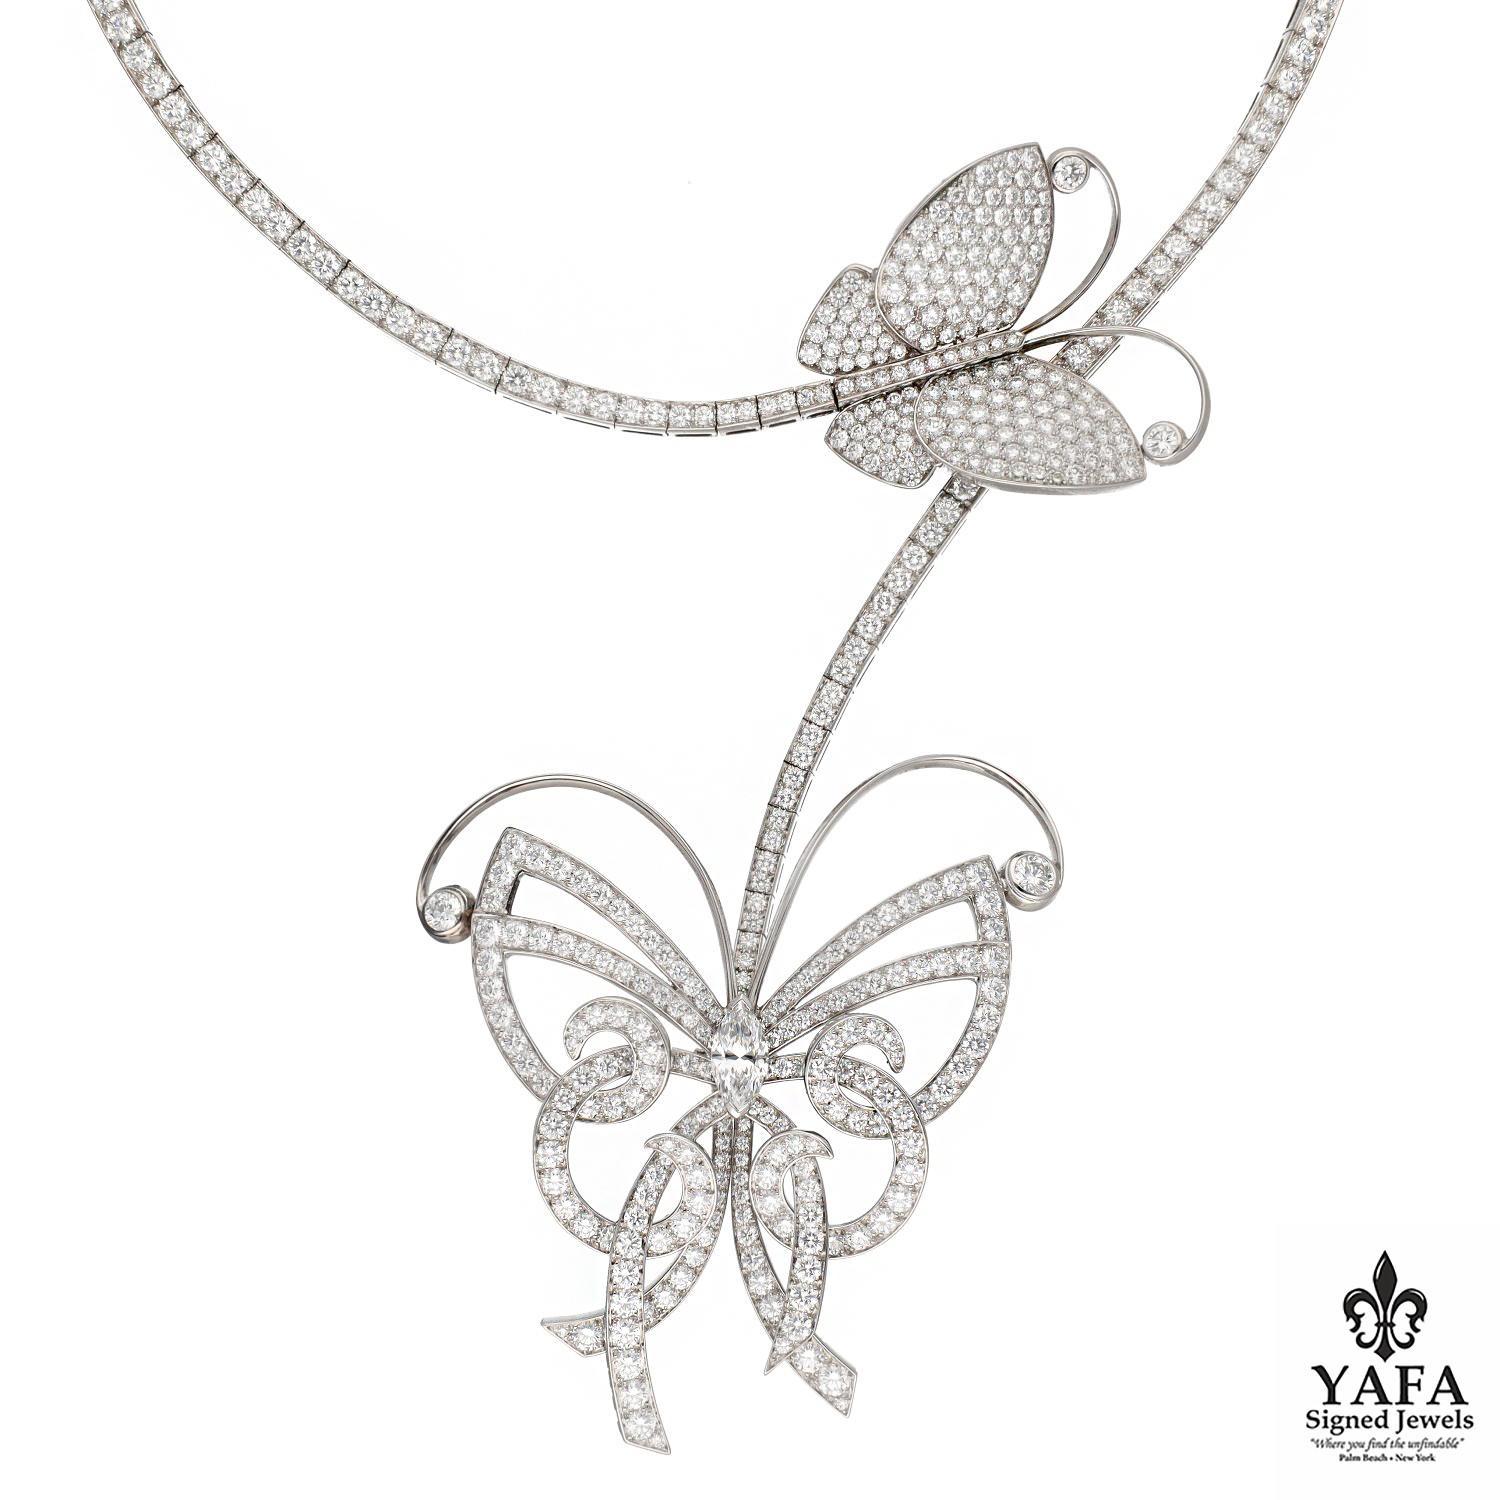 Van Cleef & Arpels 18K White Gold and Diamond Flying Butterfly Necklace with detachable Butterfly is a beautiful and whimsical piece of jewelry that captures the elegance and grace of butterflies in flight. The diaphanous elegance of butterflies has